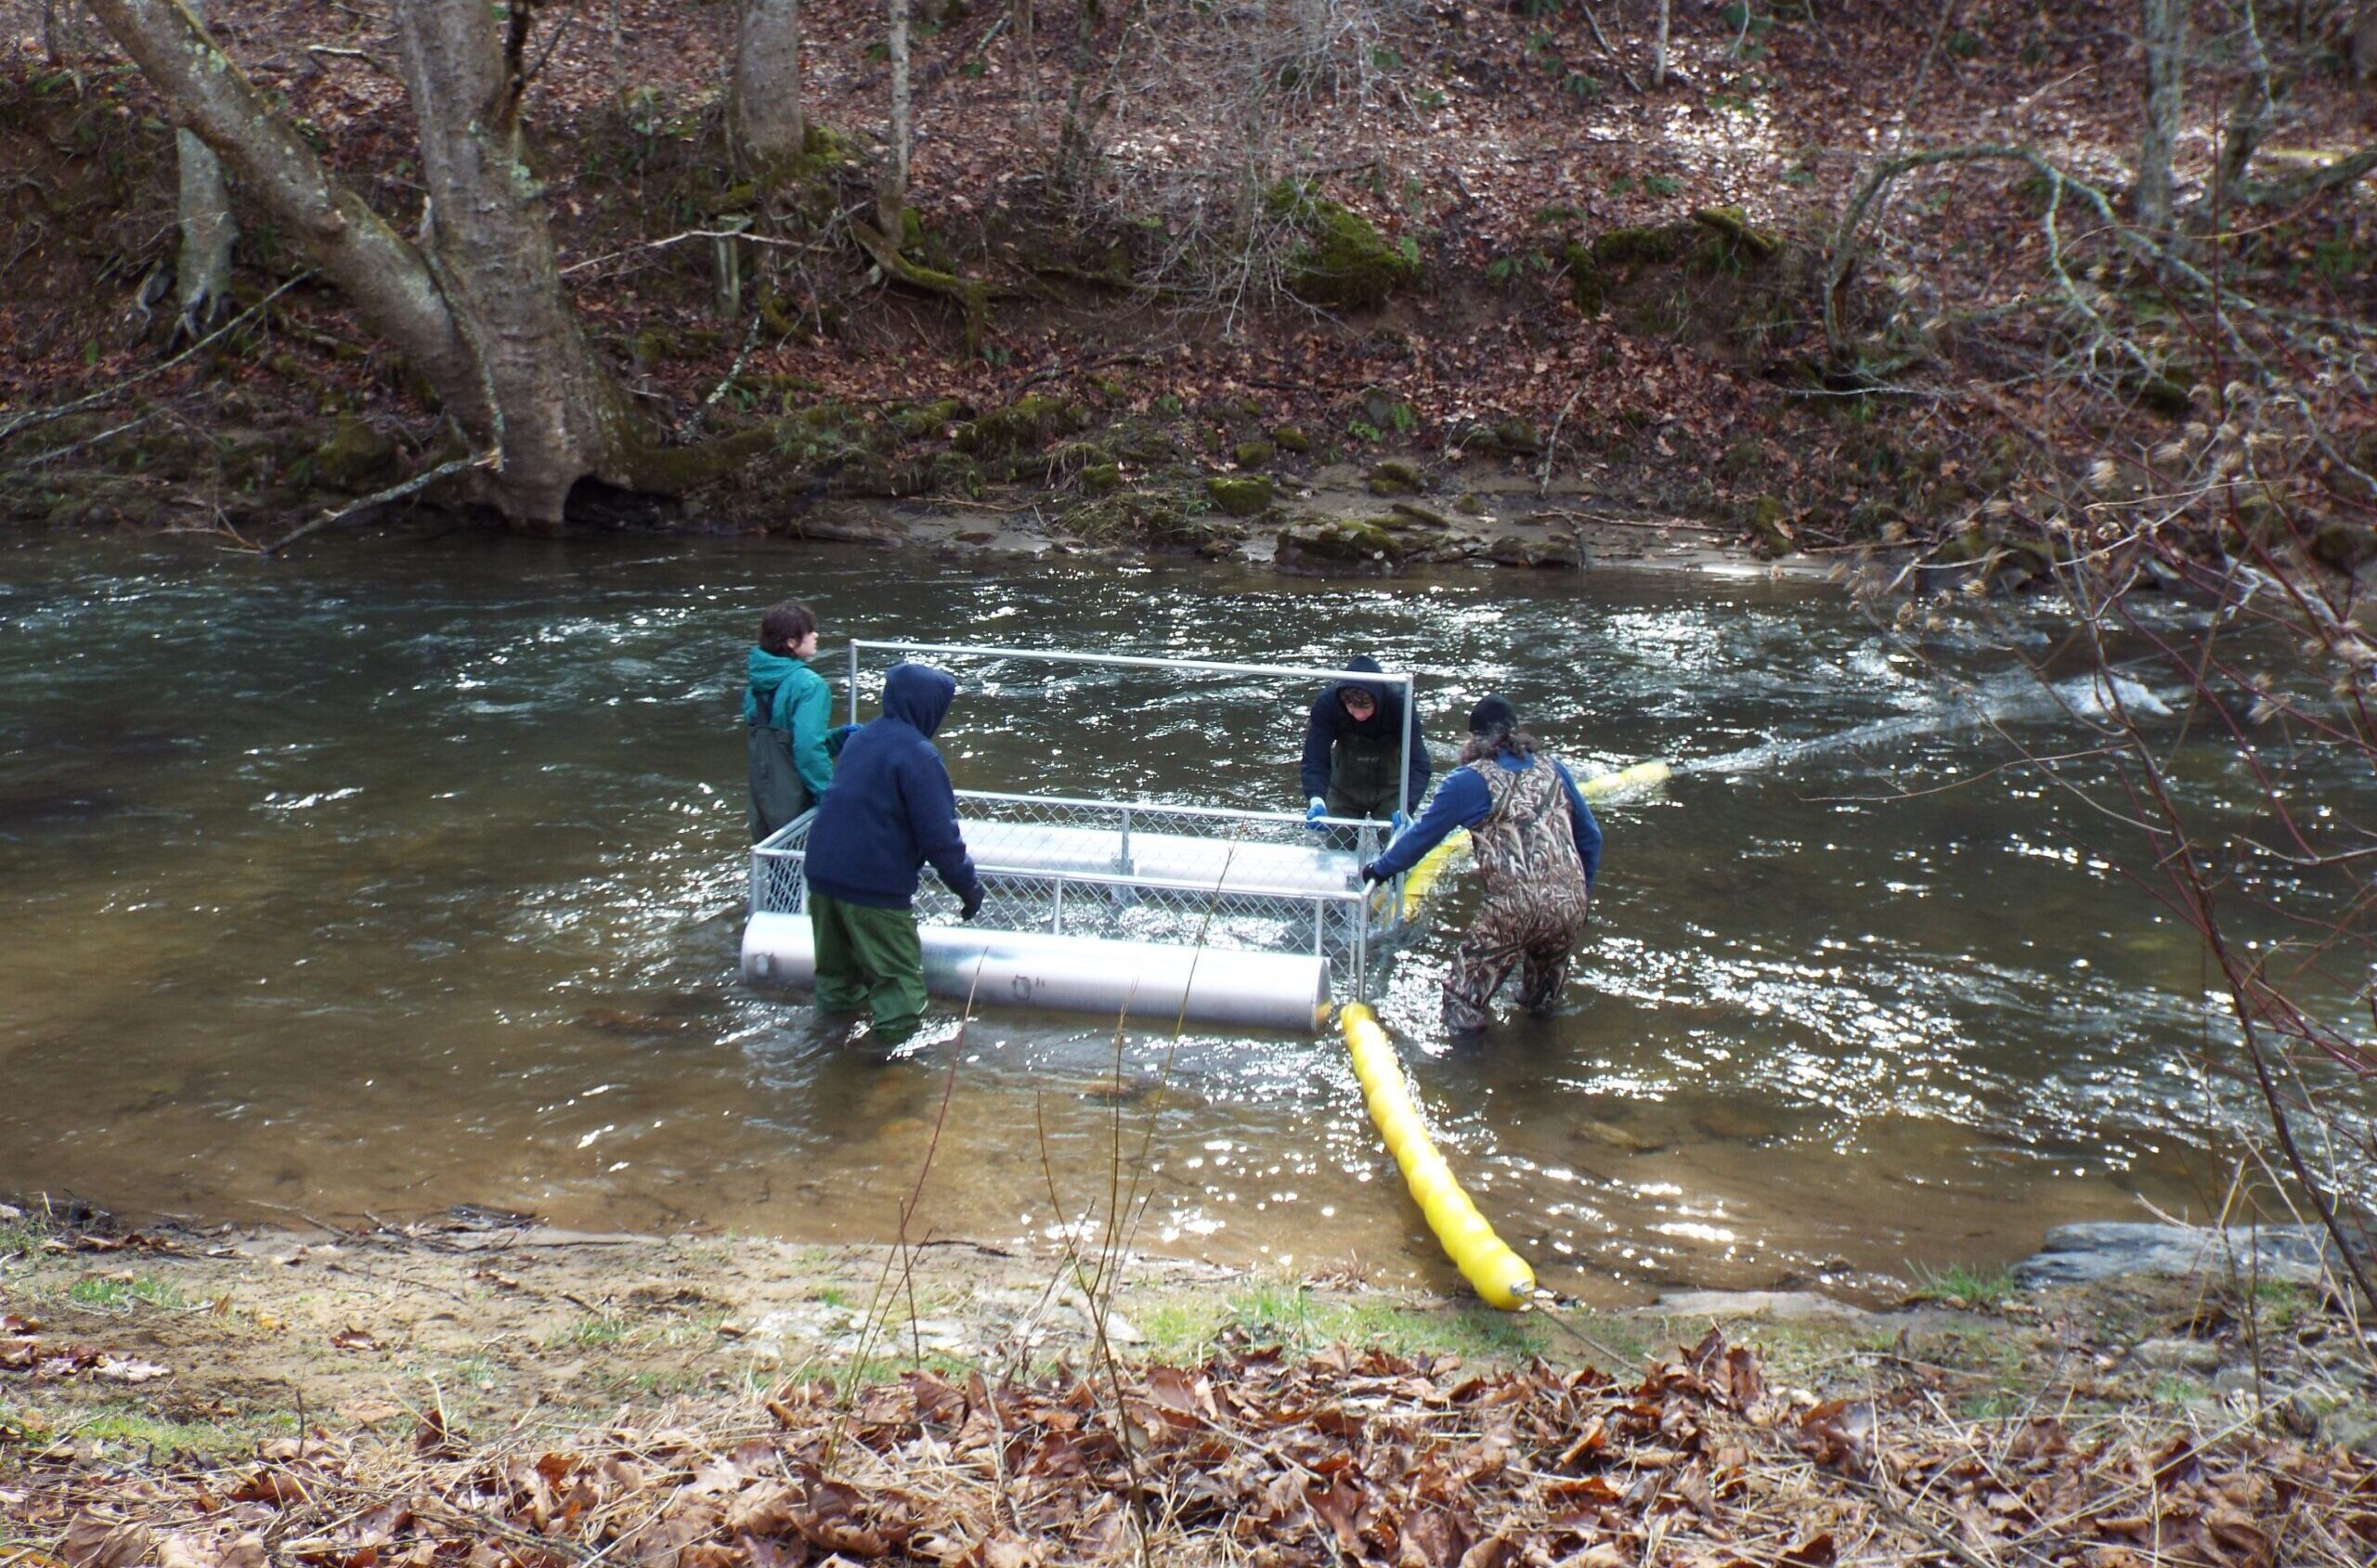 Trash Trout installed in Big Horse Creek in Lansing, NC